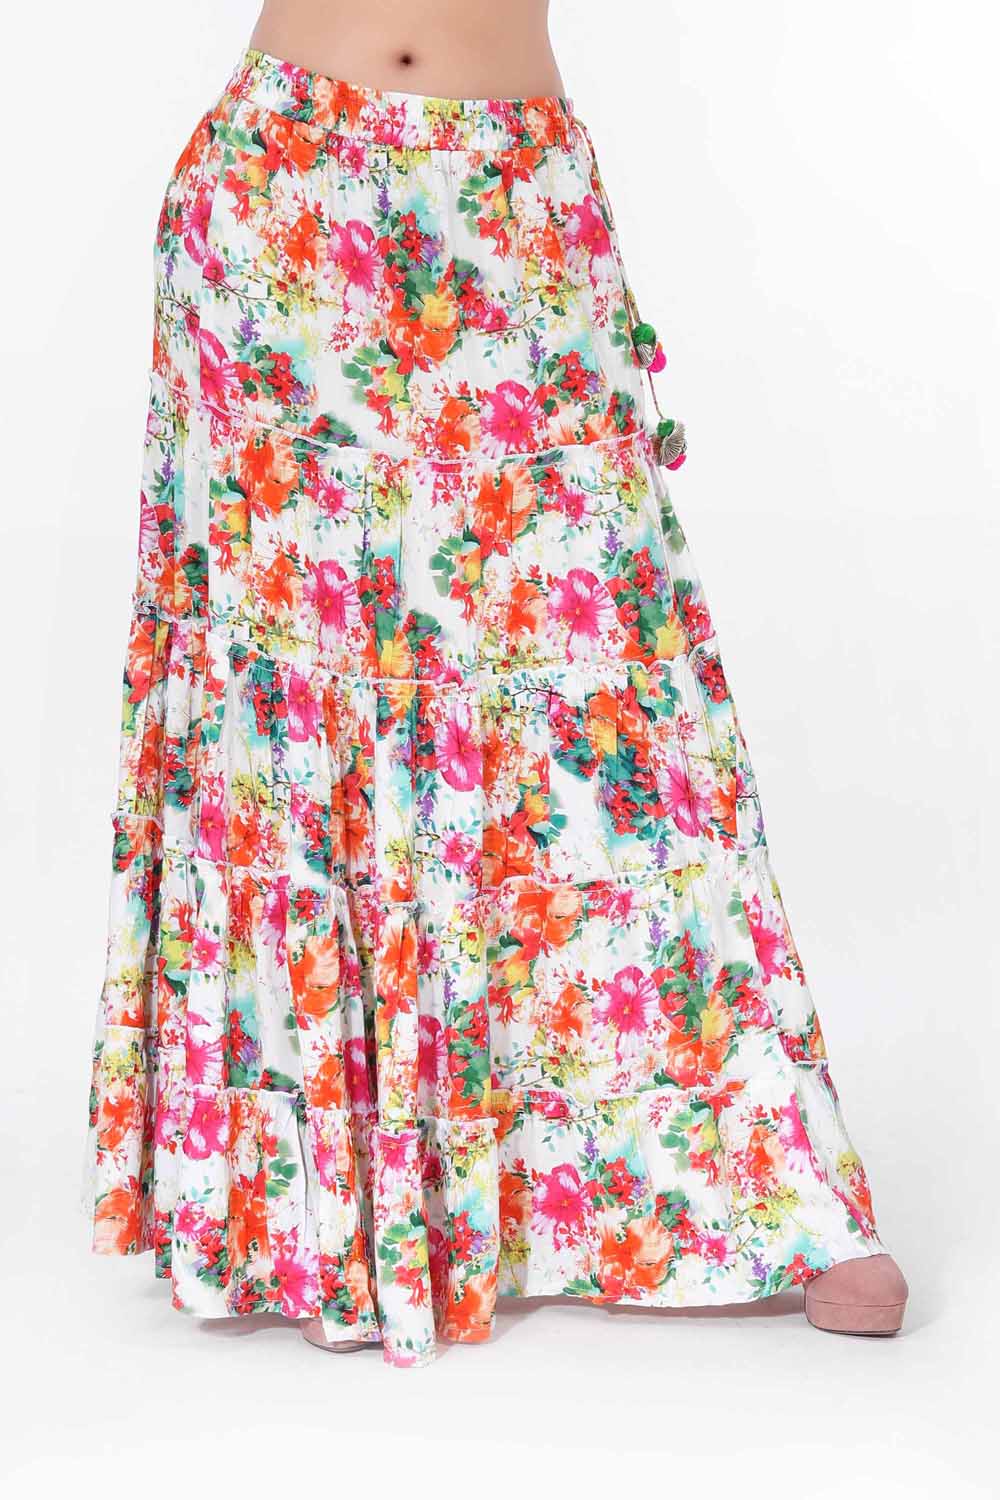 Multicolor Floral Rayon Printed Skirt